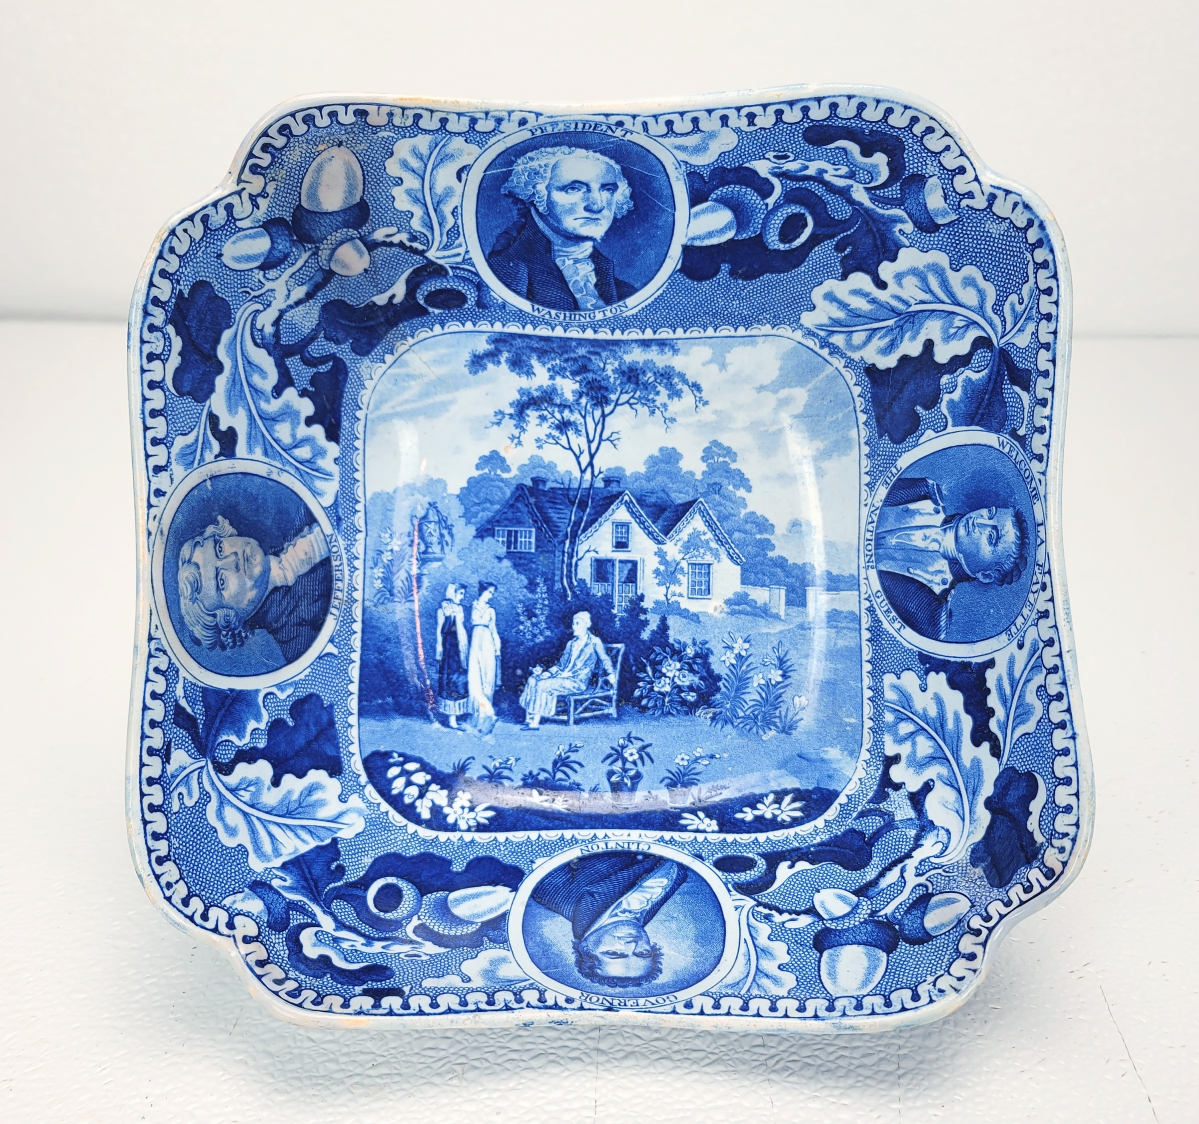 Still available for purchase was this historical blue Staffordshire cut-corner bowl with medallions of Washington, Lafayette, Jefferson and Clinton and also featuring Aqueduct Bridge and the Erie Canal. It was dated circa 1825 and priced at $23,200.